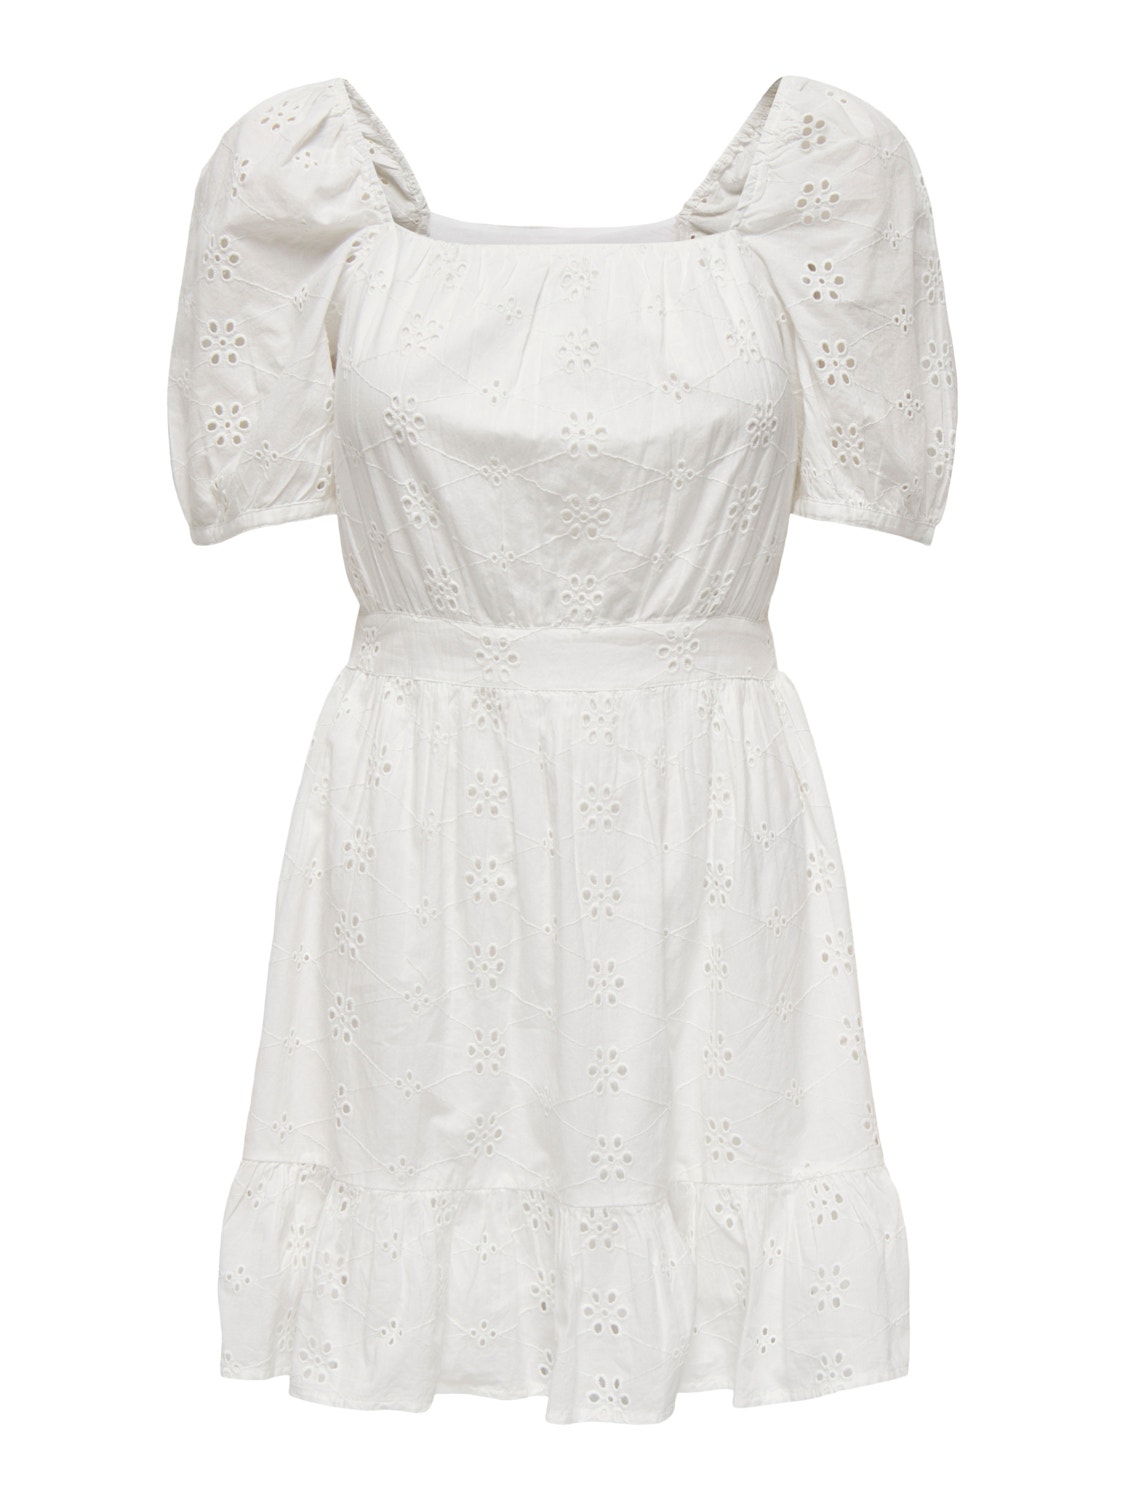 ONLY Mini dress with lace detail and puff sleeves -Cloud Dancer - 15296335